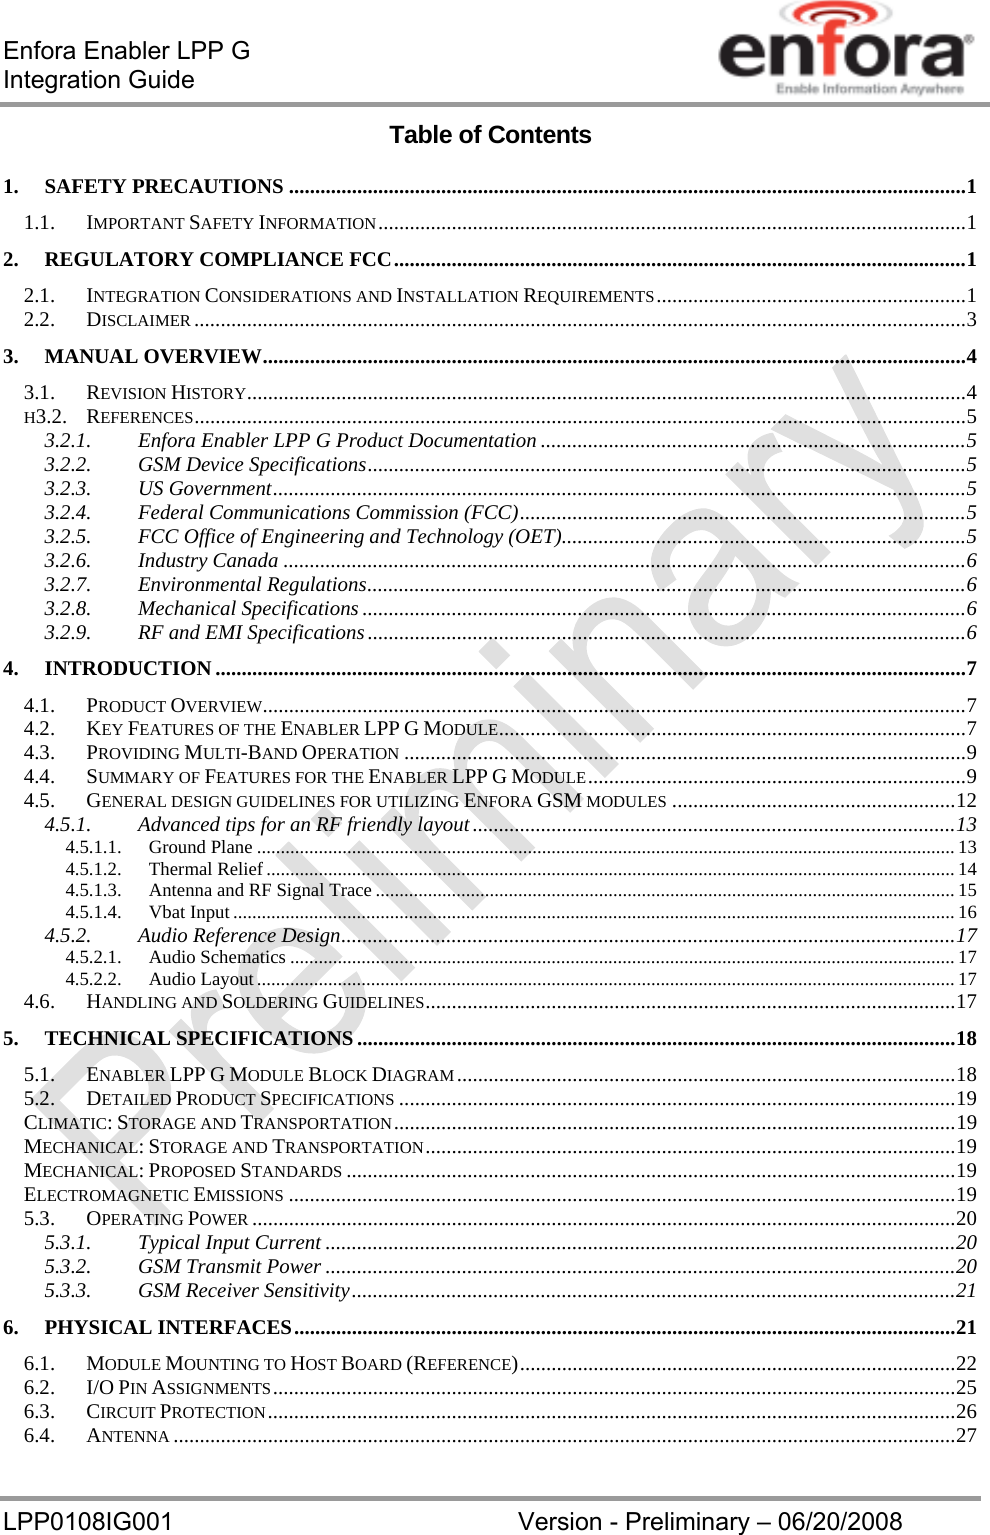 Enfora Enabler LPP G  Integration Guide LPP0108IG001  Version - Preliminary – 06/20/2008 Table of Contents 1.SAFETY PRECAUTIONS ................................................................................................................................. 11.1.IMPORTANT SAFETY INFORMATION ................................................................................................................ 12.REGULATORY COMPLIANCE FCC ............................................................................................................. 12.1.INTEGRATION CONSIDERATIONS AND INSTALLATION REQUIREMENTS ........................................................... 12.2.DISCLAIMER ................................................................................................................................................... 33.MANUAL OVERVIEW ...................................................................................................................................... 43.1.REVISION HISTORY ......................................................................................................................................... 4H3.2.REFERENCES ................................................................................................................................................... 53.2.1.Enfora Enabler LPP G Product Documentation ................................................................................. 53.2.2.GSM Device Specifications .................................................................................................................. 53.2.3.US Government .................................................................................................................................... 53.2.4.Federal Communications Commission (FCC) ..................................................................................... 53.2.5.FCC Office of Engineering and Technology (OET) ............................................................................. 53.2.6.Industry Canada .................................................................................................................................. 63.2.7.Environmental Regulations .................................................................................................................. 63.2.8.Mechanical Specifications ................................................................................................................... 63.2.9.RF and EMI Specifications .................................................................................................................. 64.INTRODUCTION ............................................................................................................................................... 74.1.PRODUCT OVERVIEW...................................................................................................................................... 74.2.KEY FEATURES OF THE ENABLER LPP G MODULE .........................................................................................  74.3.PROVIDING MULTI-BAND OPERATION ........................................................................................................... 94.4.SUMMARY OF FEATURES FOR THE ENABLER LPP G MODULE ........................................................................ 94.5.GENERAL DESIGN GUIDELINES FOR UTILIZING ENFORA GSM MODULES ...................................................... 124.5.1.Advanced tips for an RF friendly layout ............................................................................................ 134.5.1.1.Ground Plane ................................................................................................................................................... 134.5.1.2.Thermal Relief ................................................................................................................................................. 144.5.1.3.Antenna and RF Signal Trace .......................................................................................................................... 154.5.1.4.Vbat Input ........................................................................................................................................................ 164.5.2.Audio Reference Design ..................................................................................................................... 174.5.2.1.Audio Schematics ............................................................................................................................................ 174.5.2.2.Audio Layout ................................................................................................................................................... 174.6.HANDLING AND SOLDERING GUIDELINES ..................................................................................................... 175.TECHNICAL SPECIFICATIONS .................................................................................................................. 185.1.ENABLER LPP G MODULE BLOCK DIAGRAM ............................................................................................... 185.2.DETAILED PRODUCT SPECIFICATIONS .......................................................................................................... 19CLIMATIC: STORAGE AND TRANSPORTATION ........................................................................................................... 19MECHANICAL: STORAGE AND TRANSPORTATION ..................................................................................................... 19MECHANICAL: PROPOSED STANDARDS .................................................................................................................... 19ELECTROMAGNETIC EMISSIONS ............................................................................................................................... 195.3.OPERATING POWER ...................................................................................................................................... 205.3.1.Typical Input Current ........................................................................................................................ 205.3.2.GSM Transmit Power ........................................................................................................................ 205.3.3.GSM Receiver Sensitivity ................................................................................................................... 216.PHYSICAL INTERFACES .............................................................................................................................. 216.1.MODULE MOUNTING TO HOST BOARD (REFERENCE) ................................................................................... 226.2.I/O PIN ASSIGNMENTS .................................................................................................................................. 256.3.CIRCUIT PROTECTION ................................................................................................................................... 266.4.ANTENNA ..................................................................................................................................................... 27